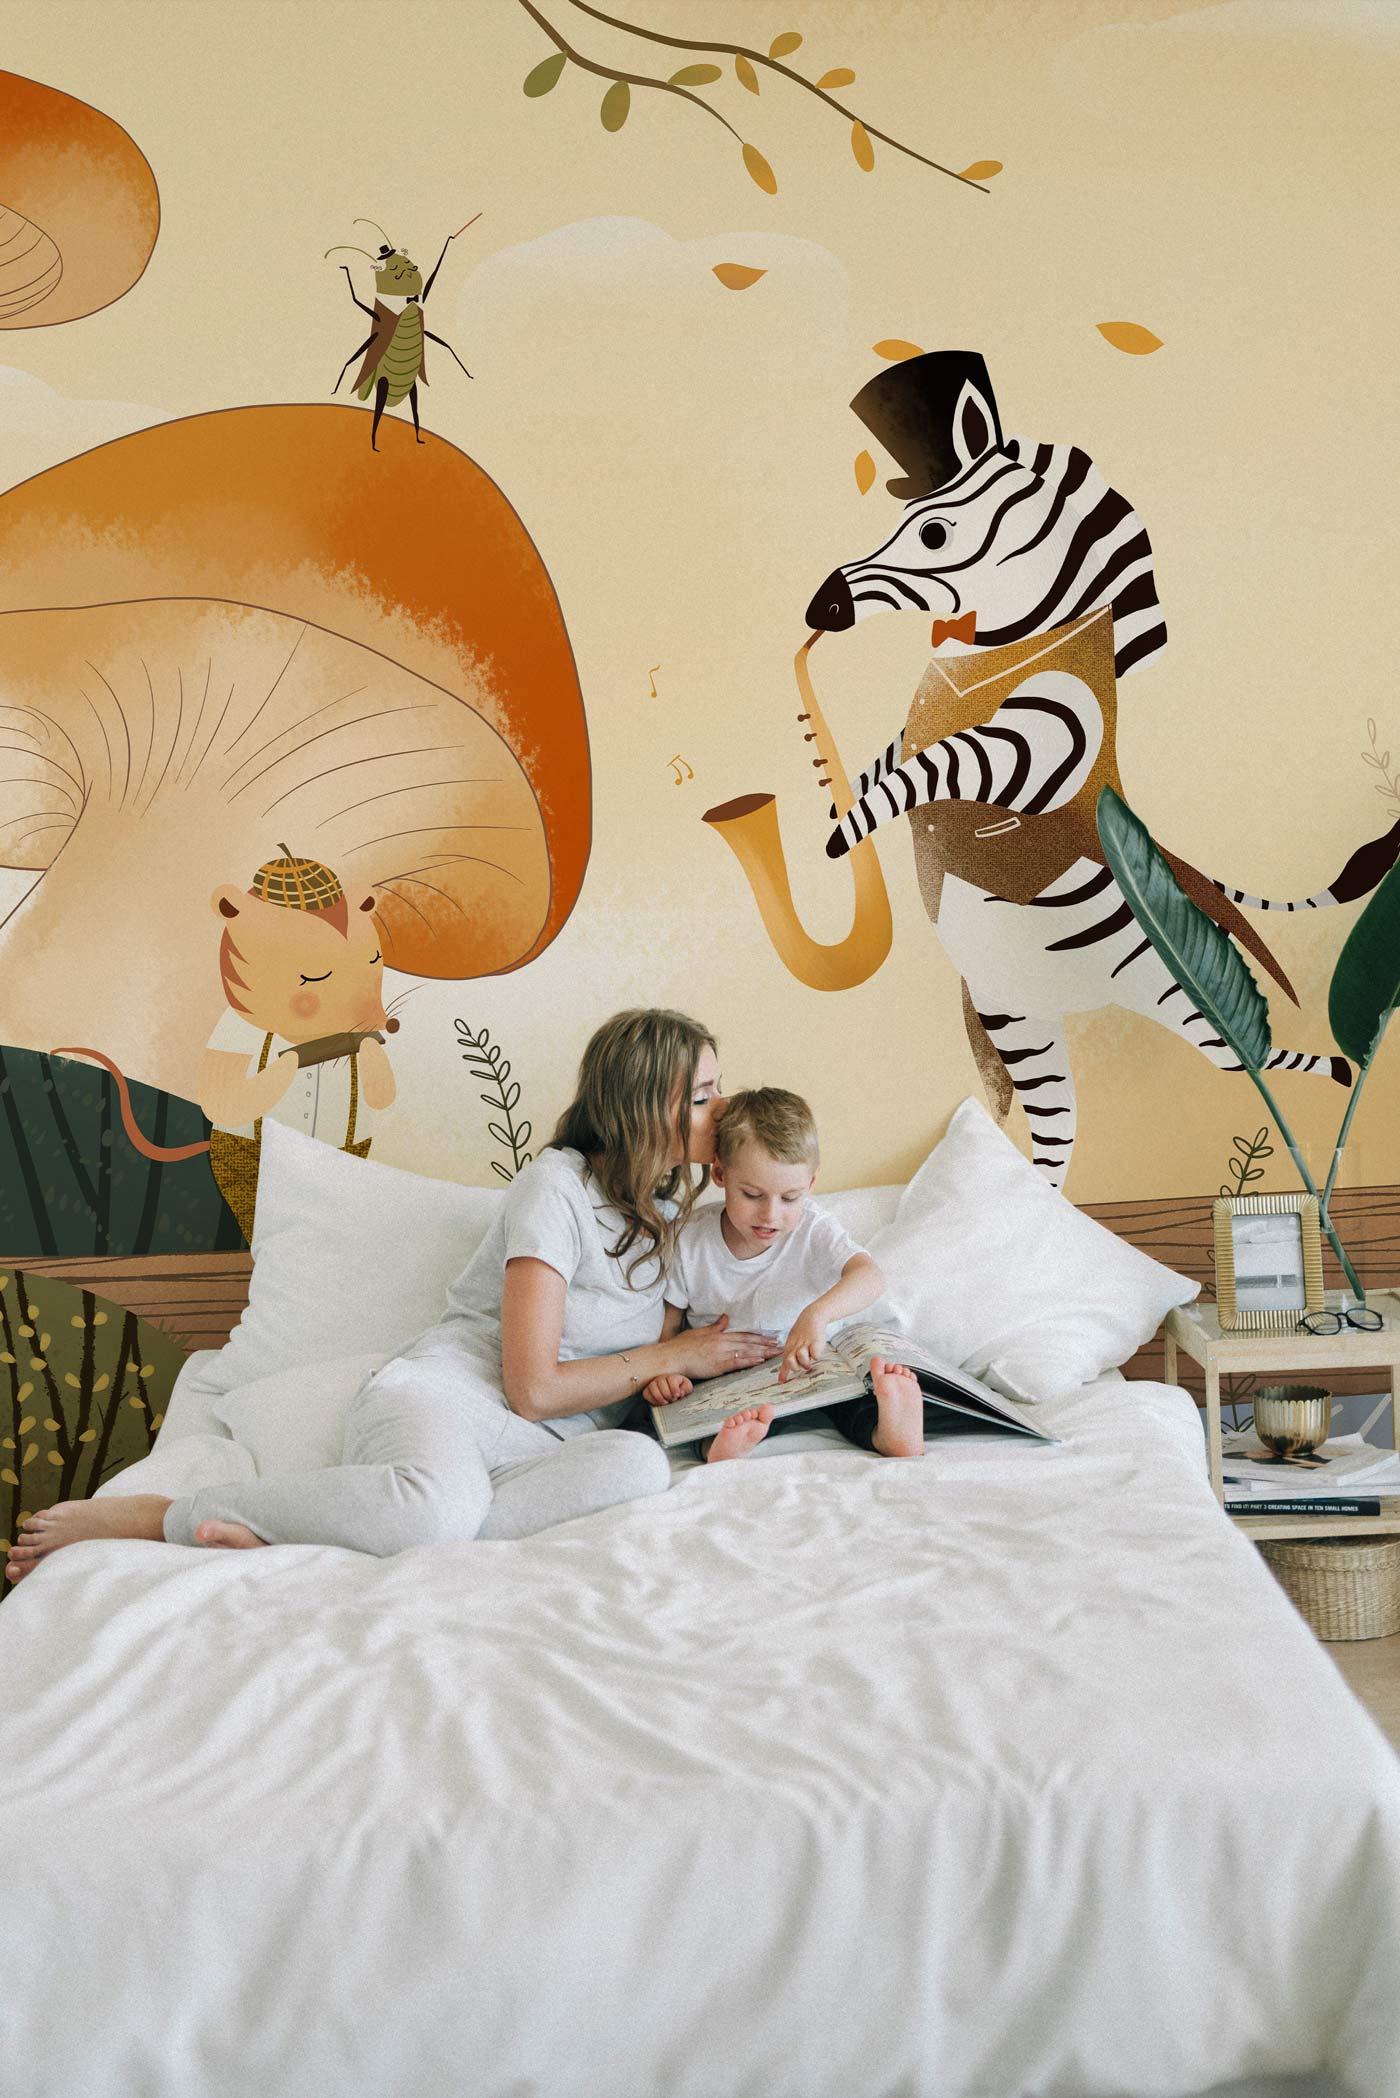 Wallpaper mural with a wild animal band design for use in decorating a bedroom